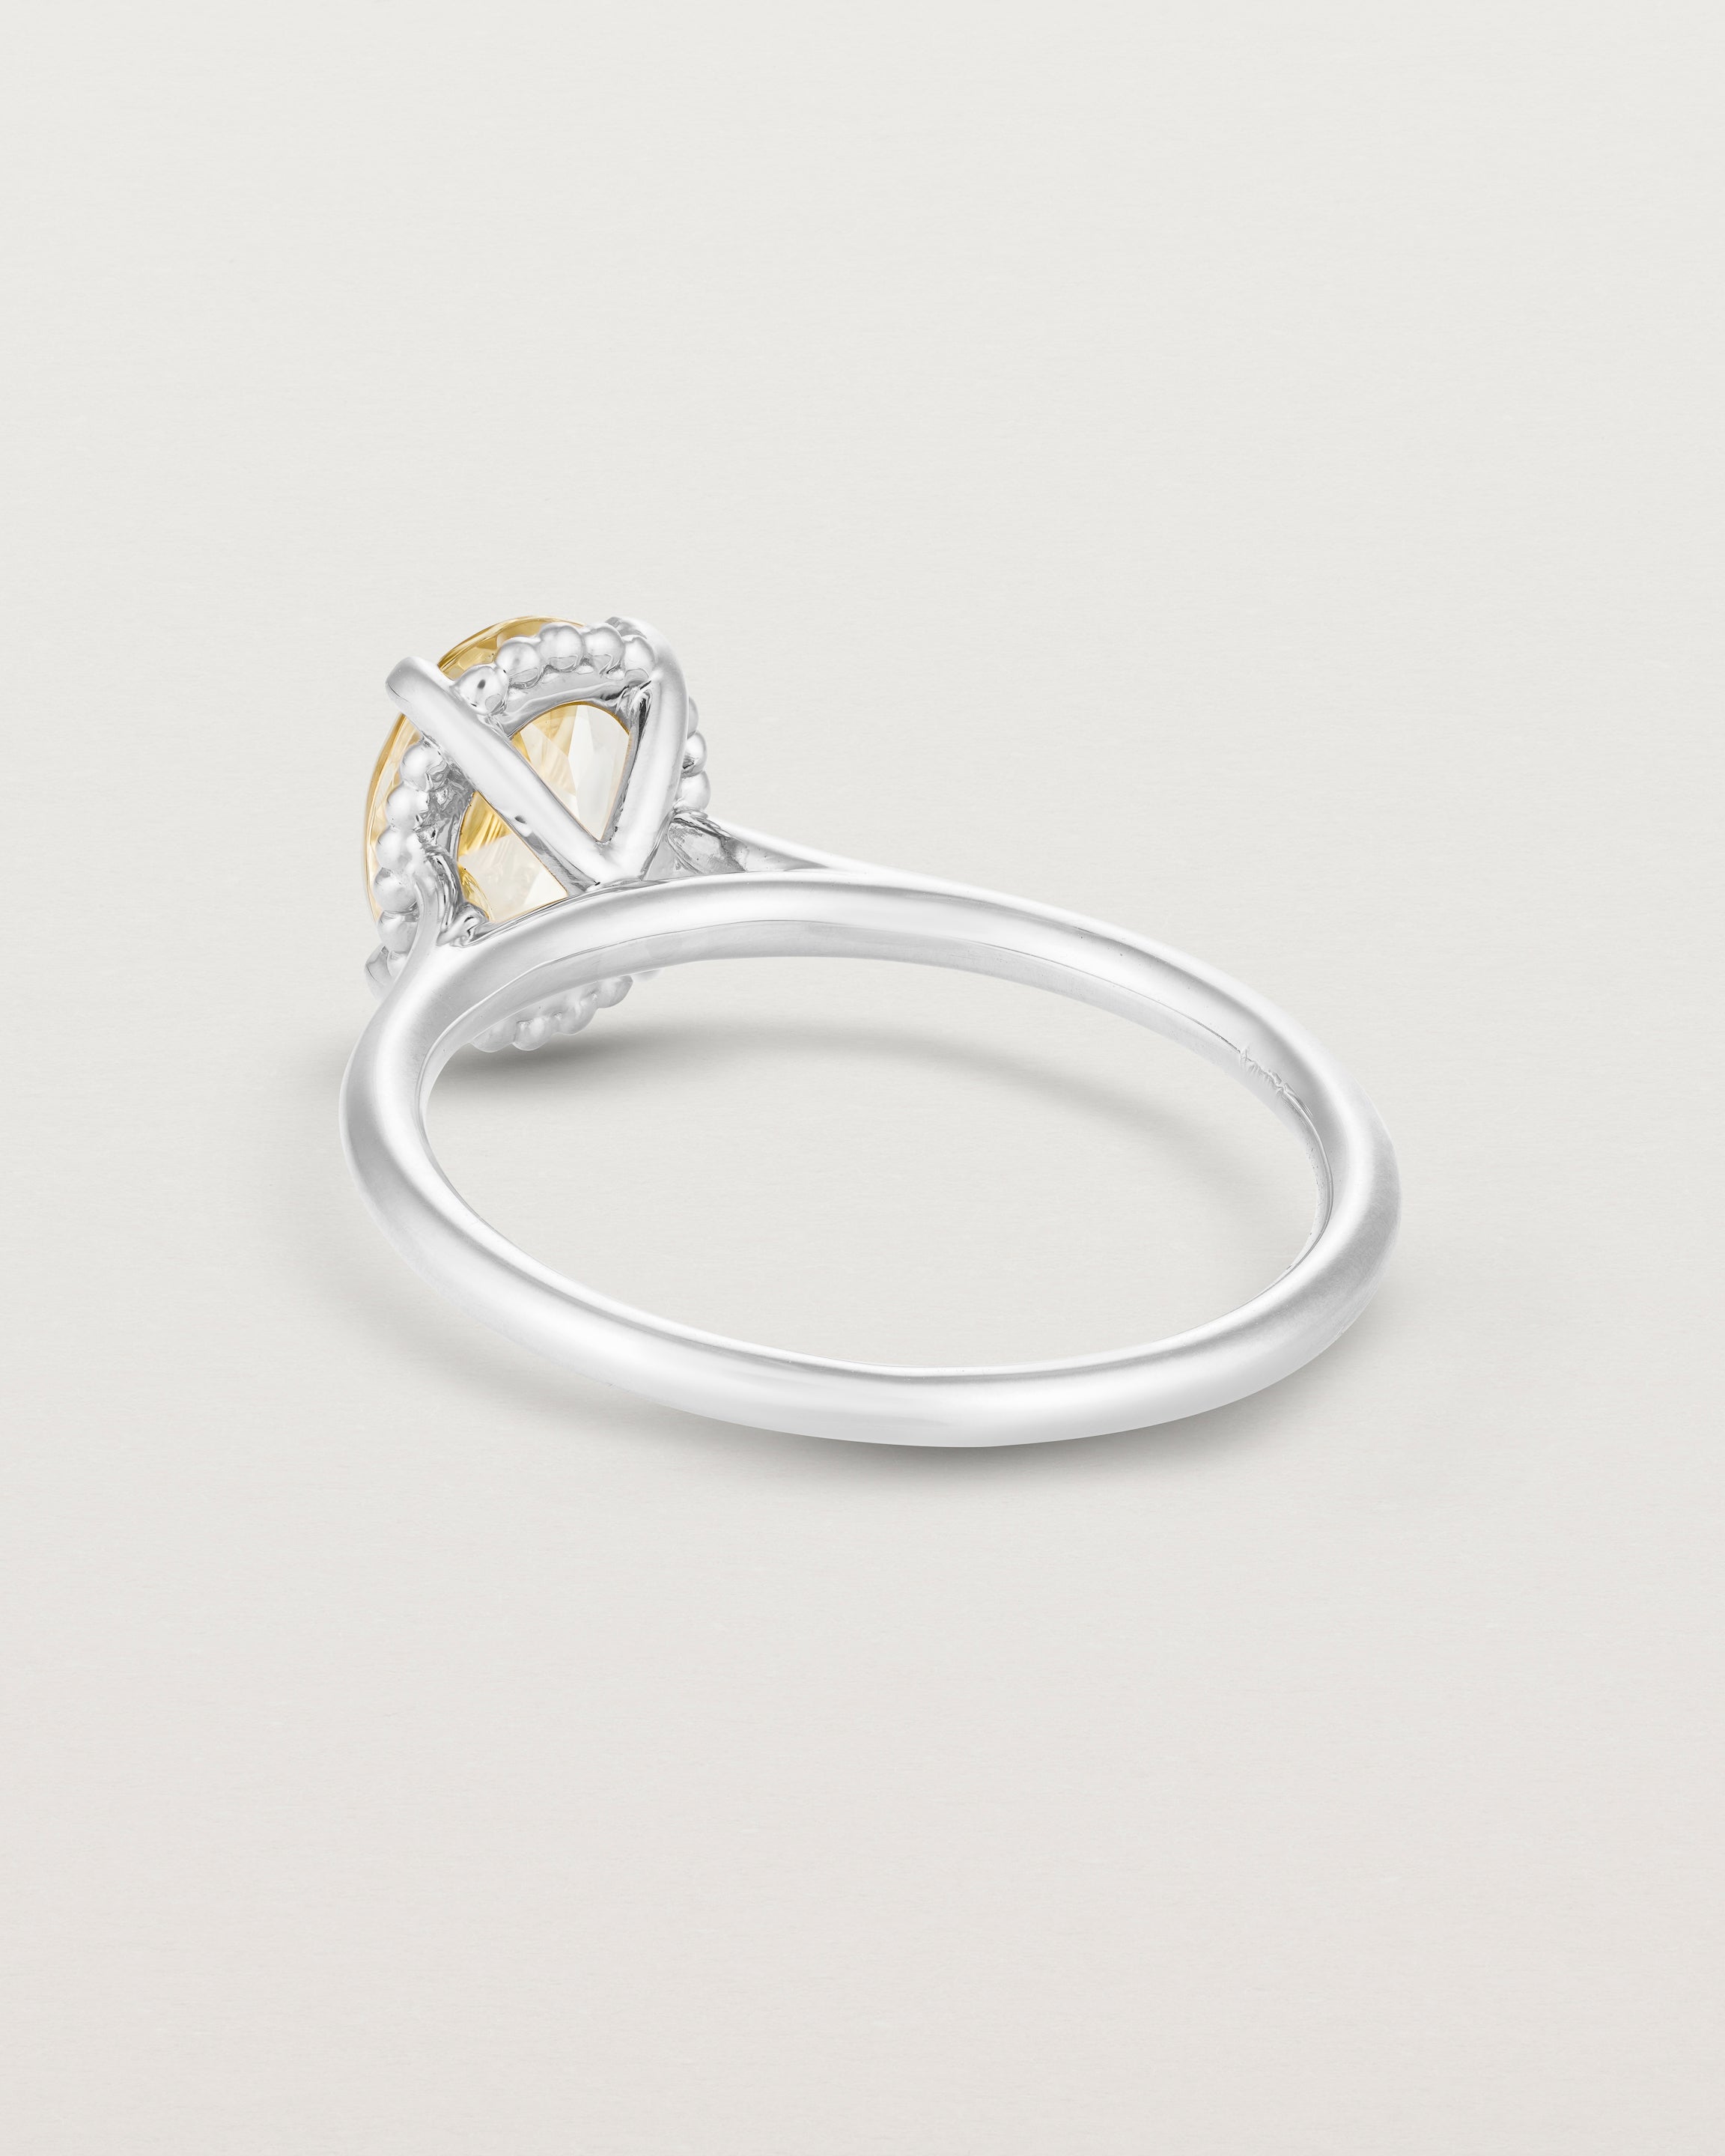 Back view of the Thea Oval Solitaire | Savannah Sunstone in white gold.